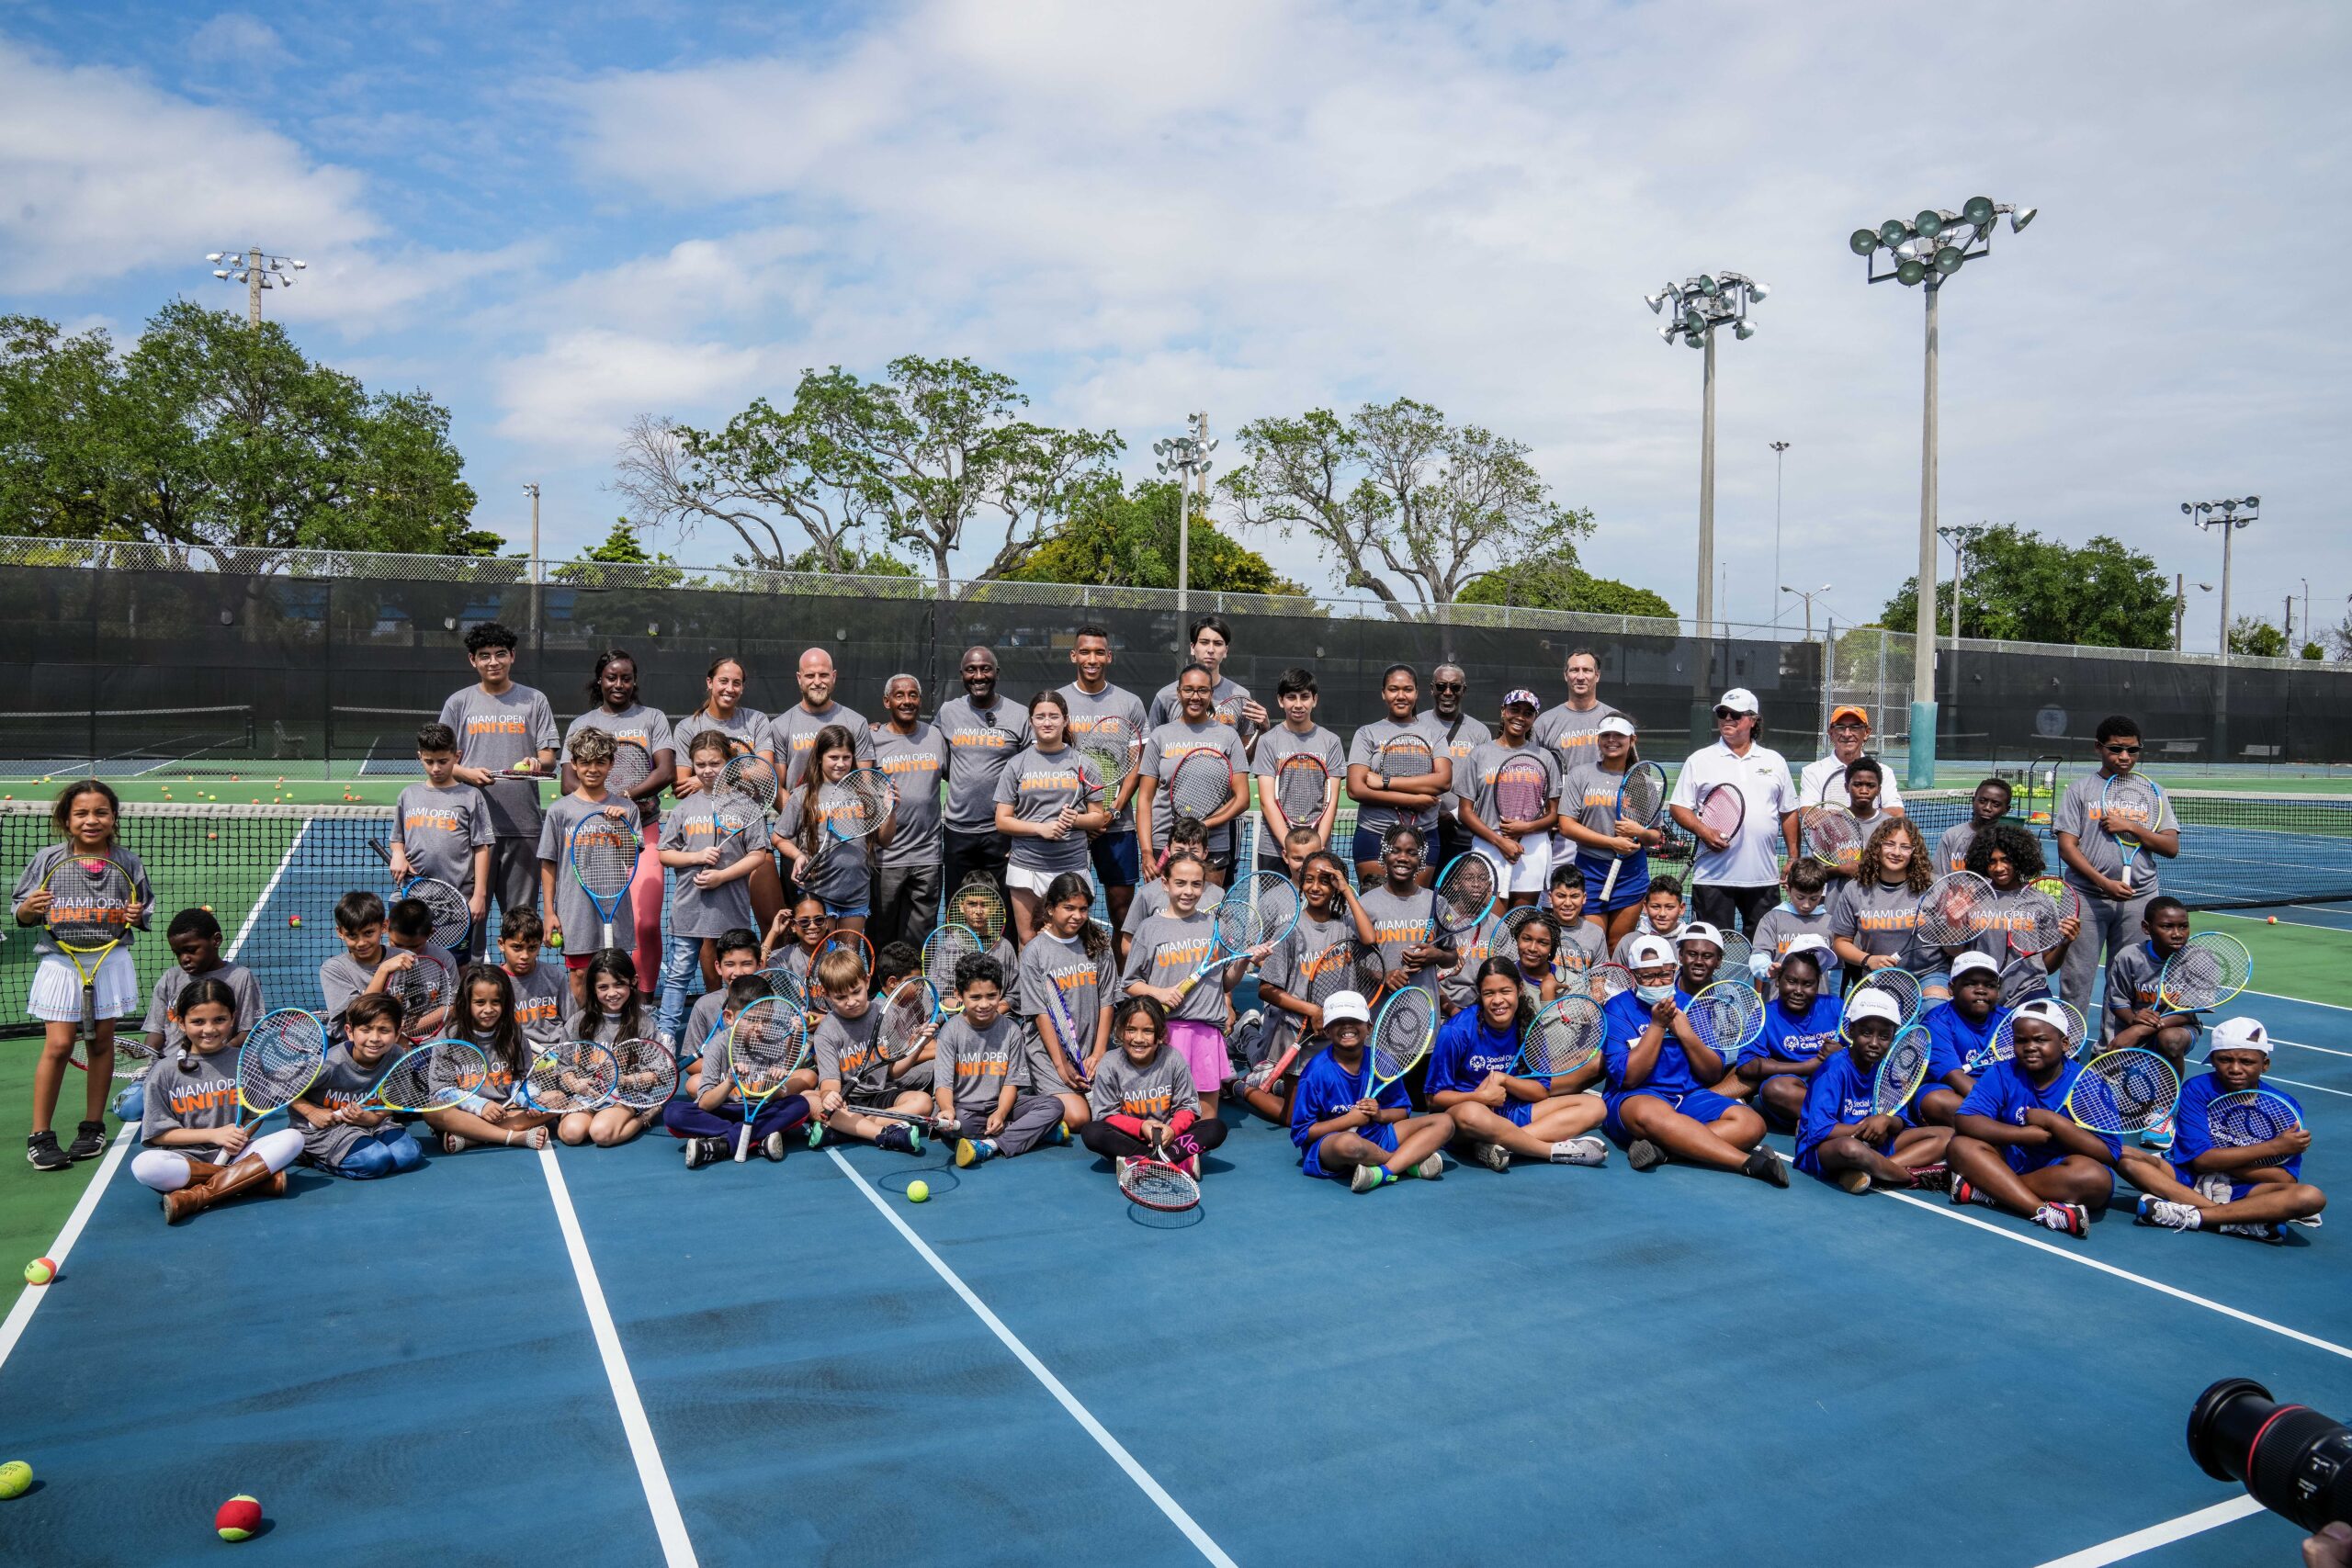 All participants gathered for a group photo at the Big Brother, Big sister event at Moore Park in Miami on March 20, 2023.